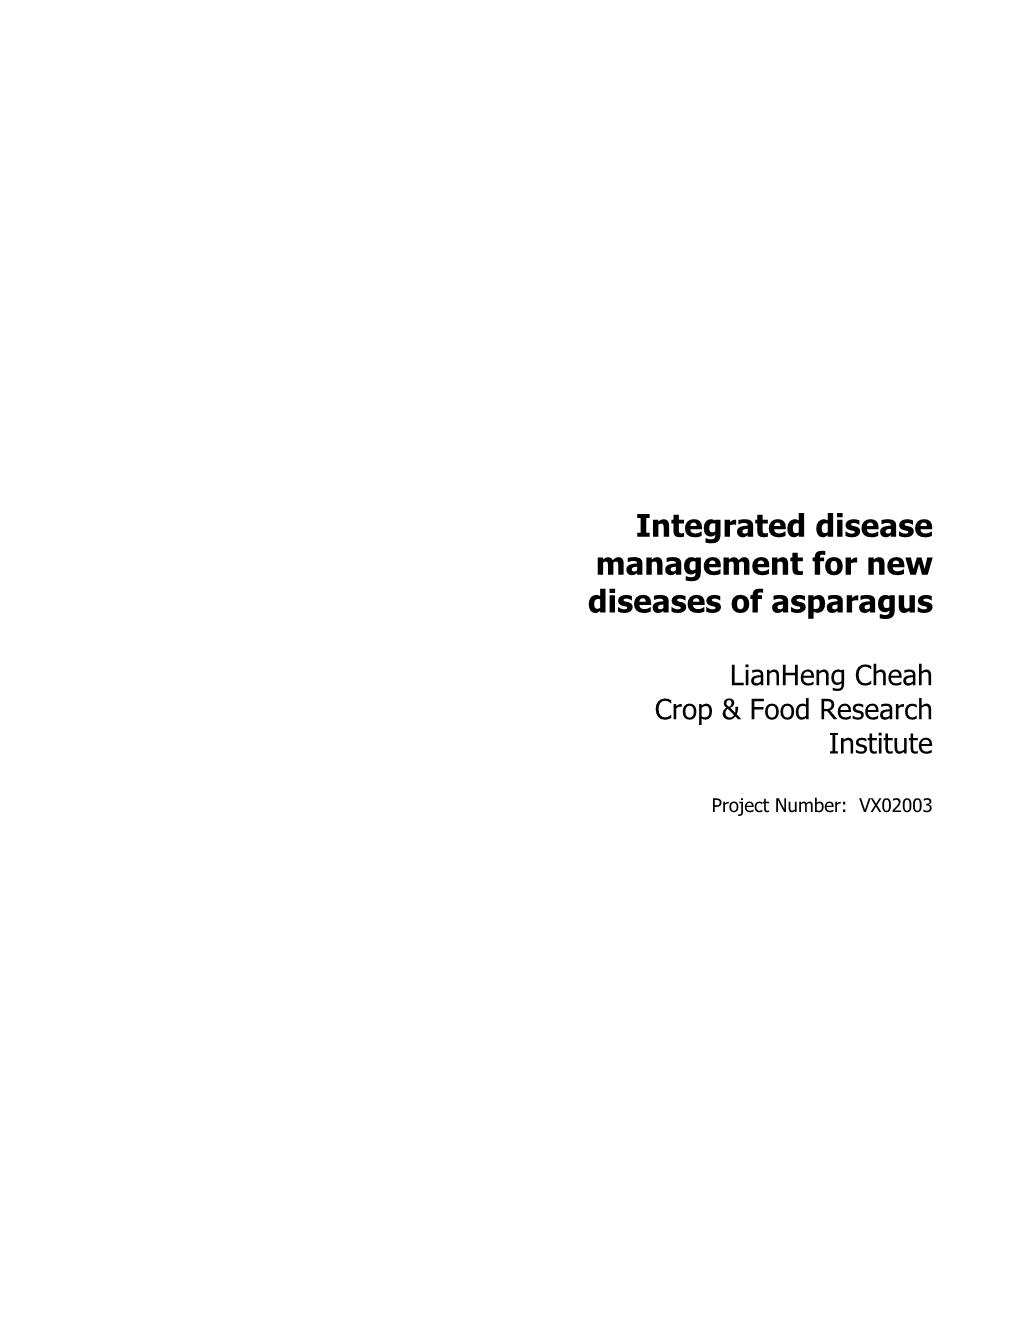 Integrated Disease Management for New Diseases of Asparagus